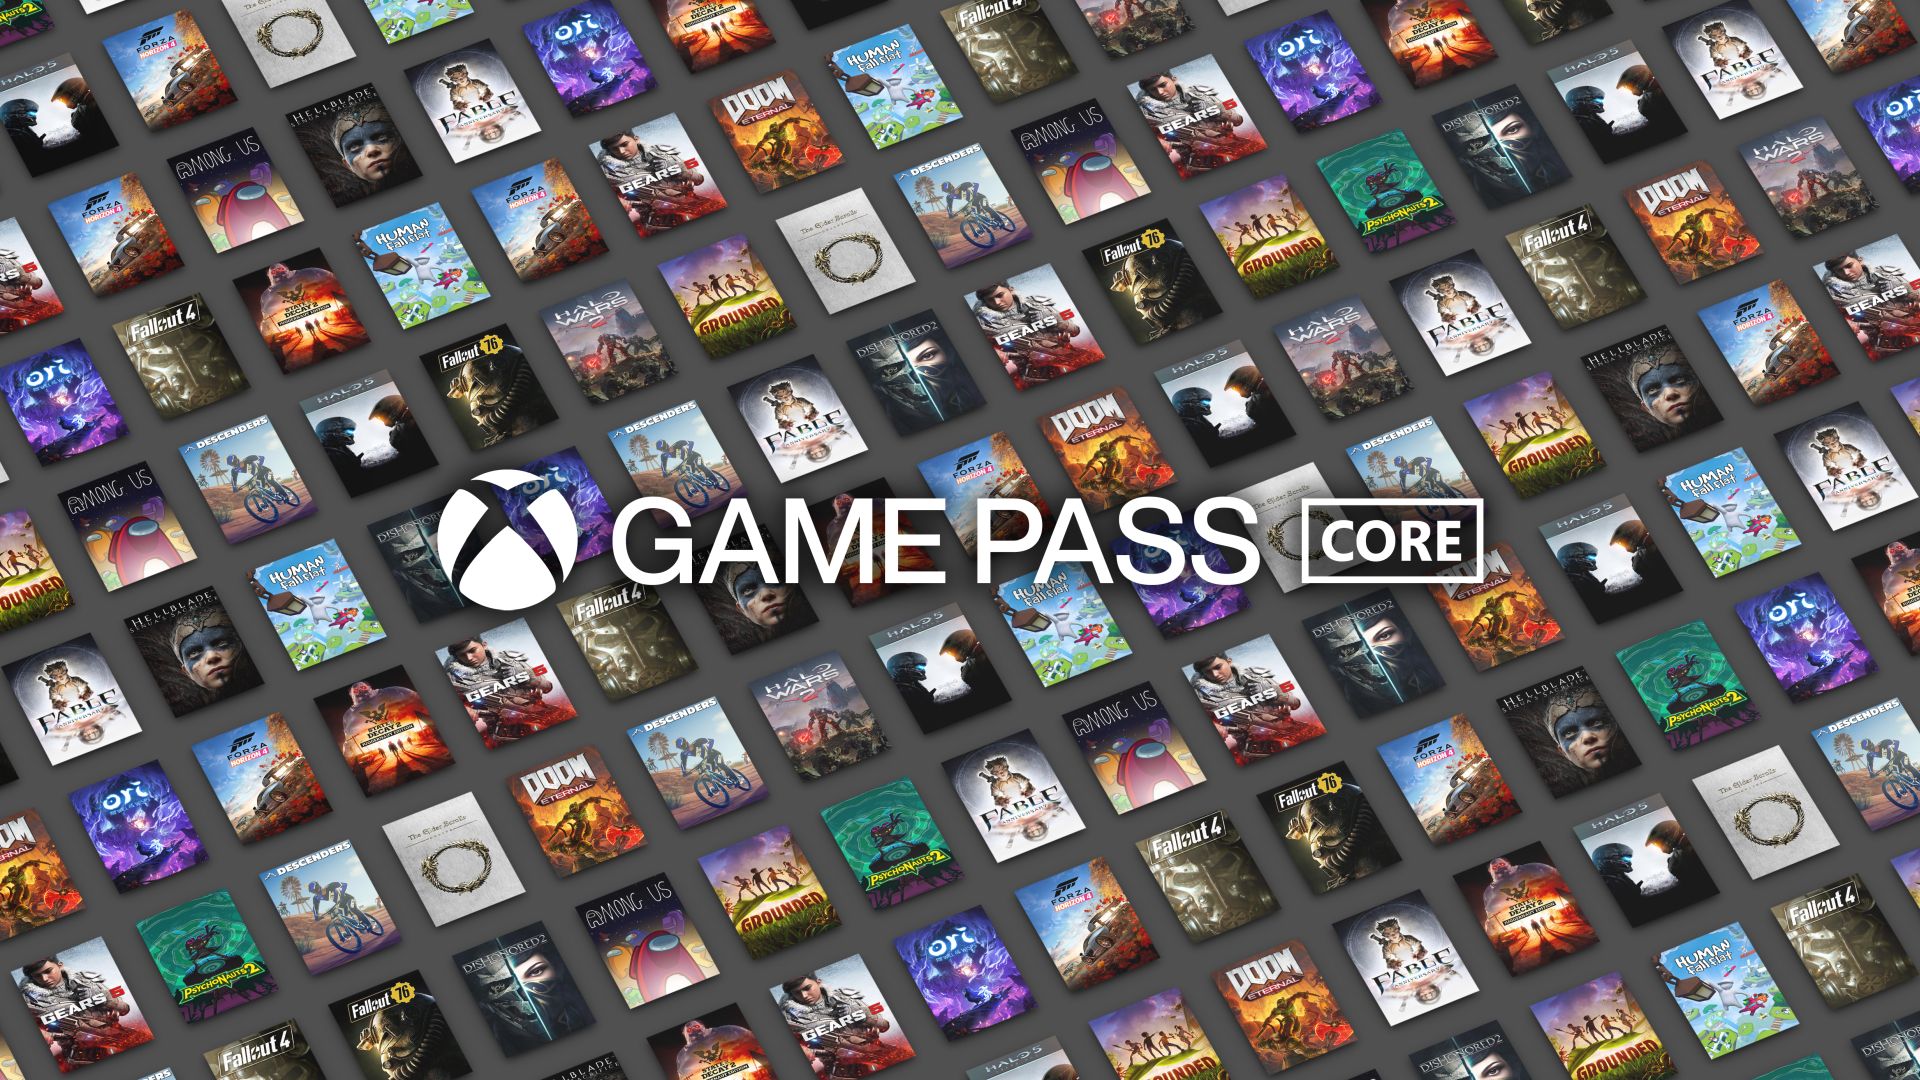 Xbox Game Pass subscriptions have begun to taper off